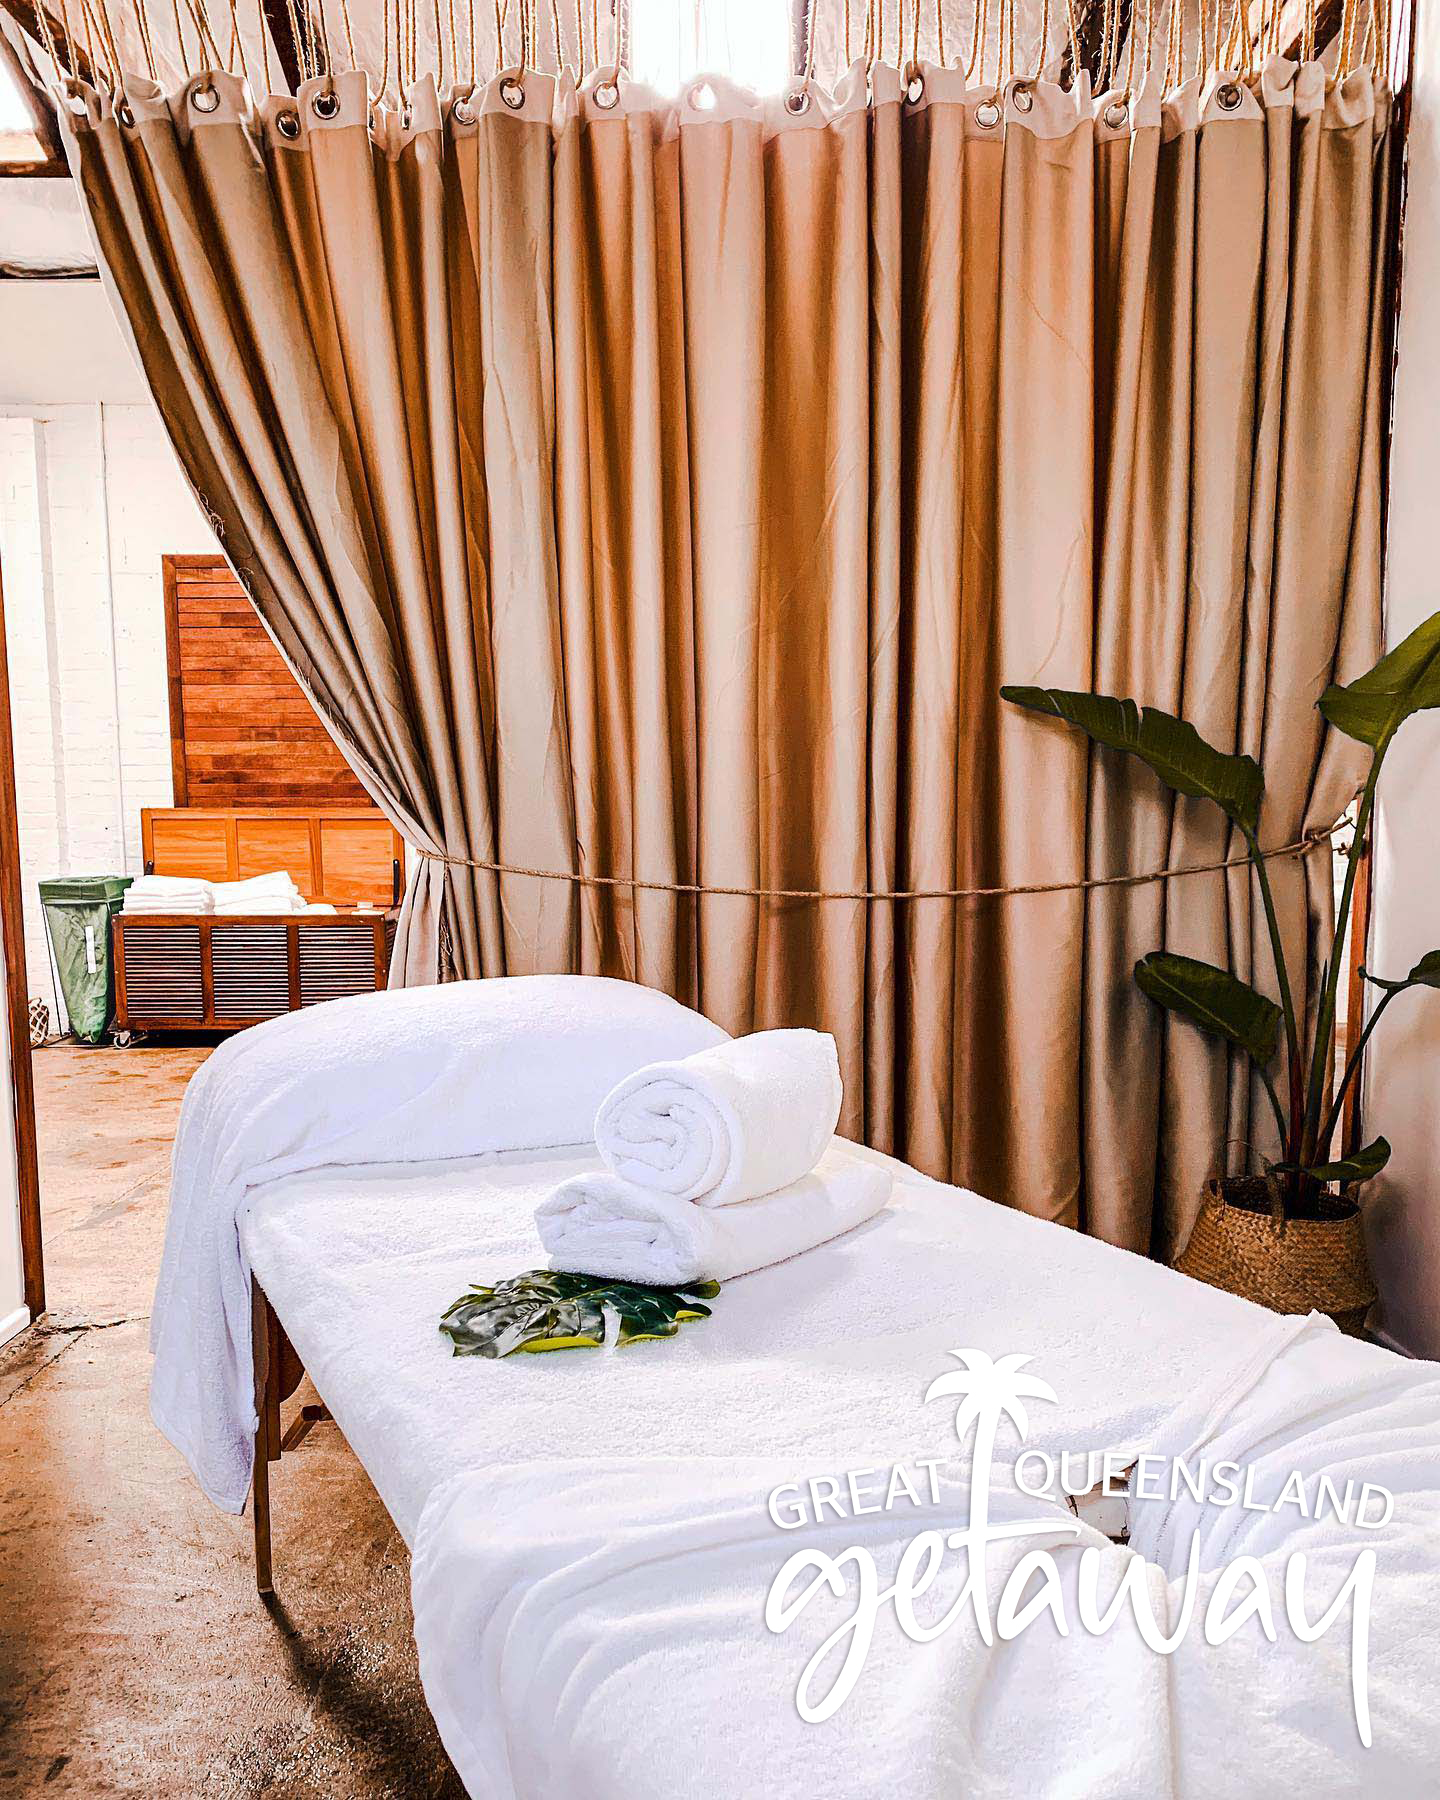 Great Holiday Getaway | Ipswich Massage and Herbal Spa